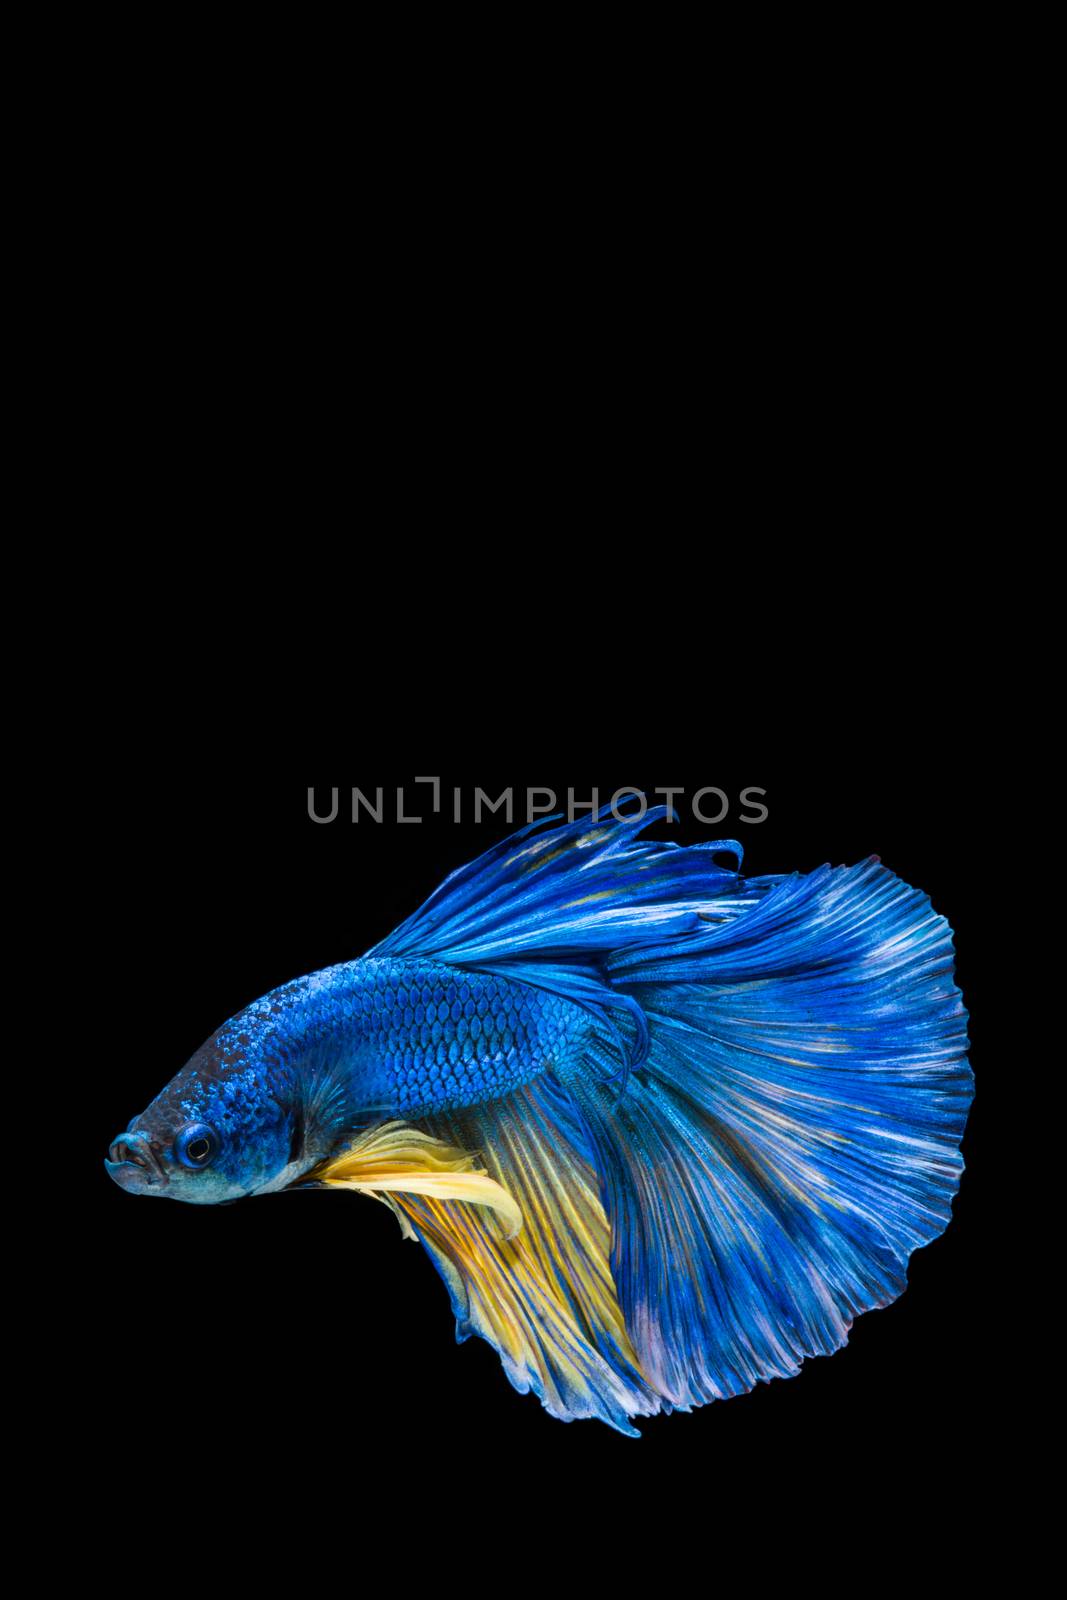 Blue and yellow betta fish, siamese fighting fish on black backg by yuiyuize